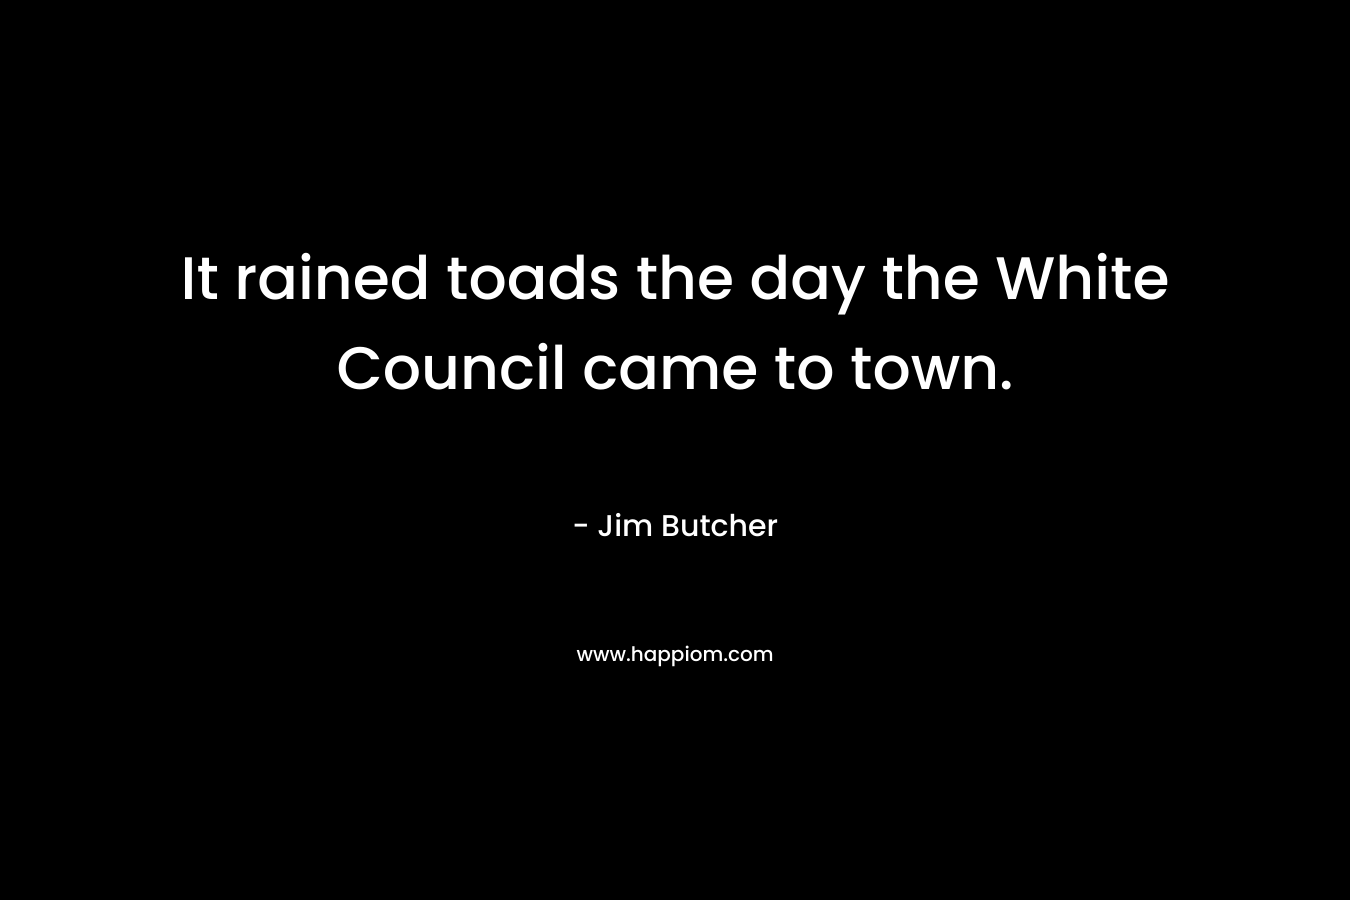 It rained toads the day the White Council came to town. – Jim Butcher